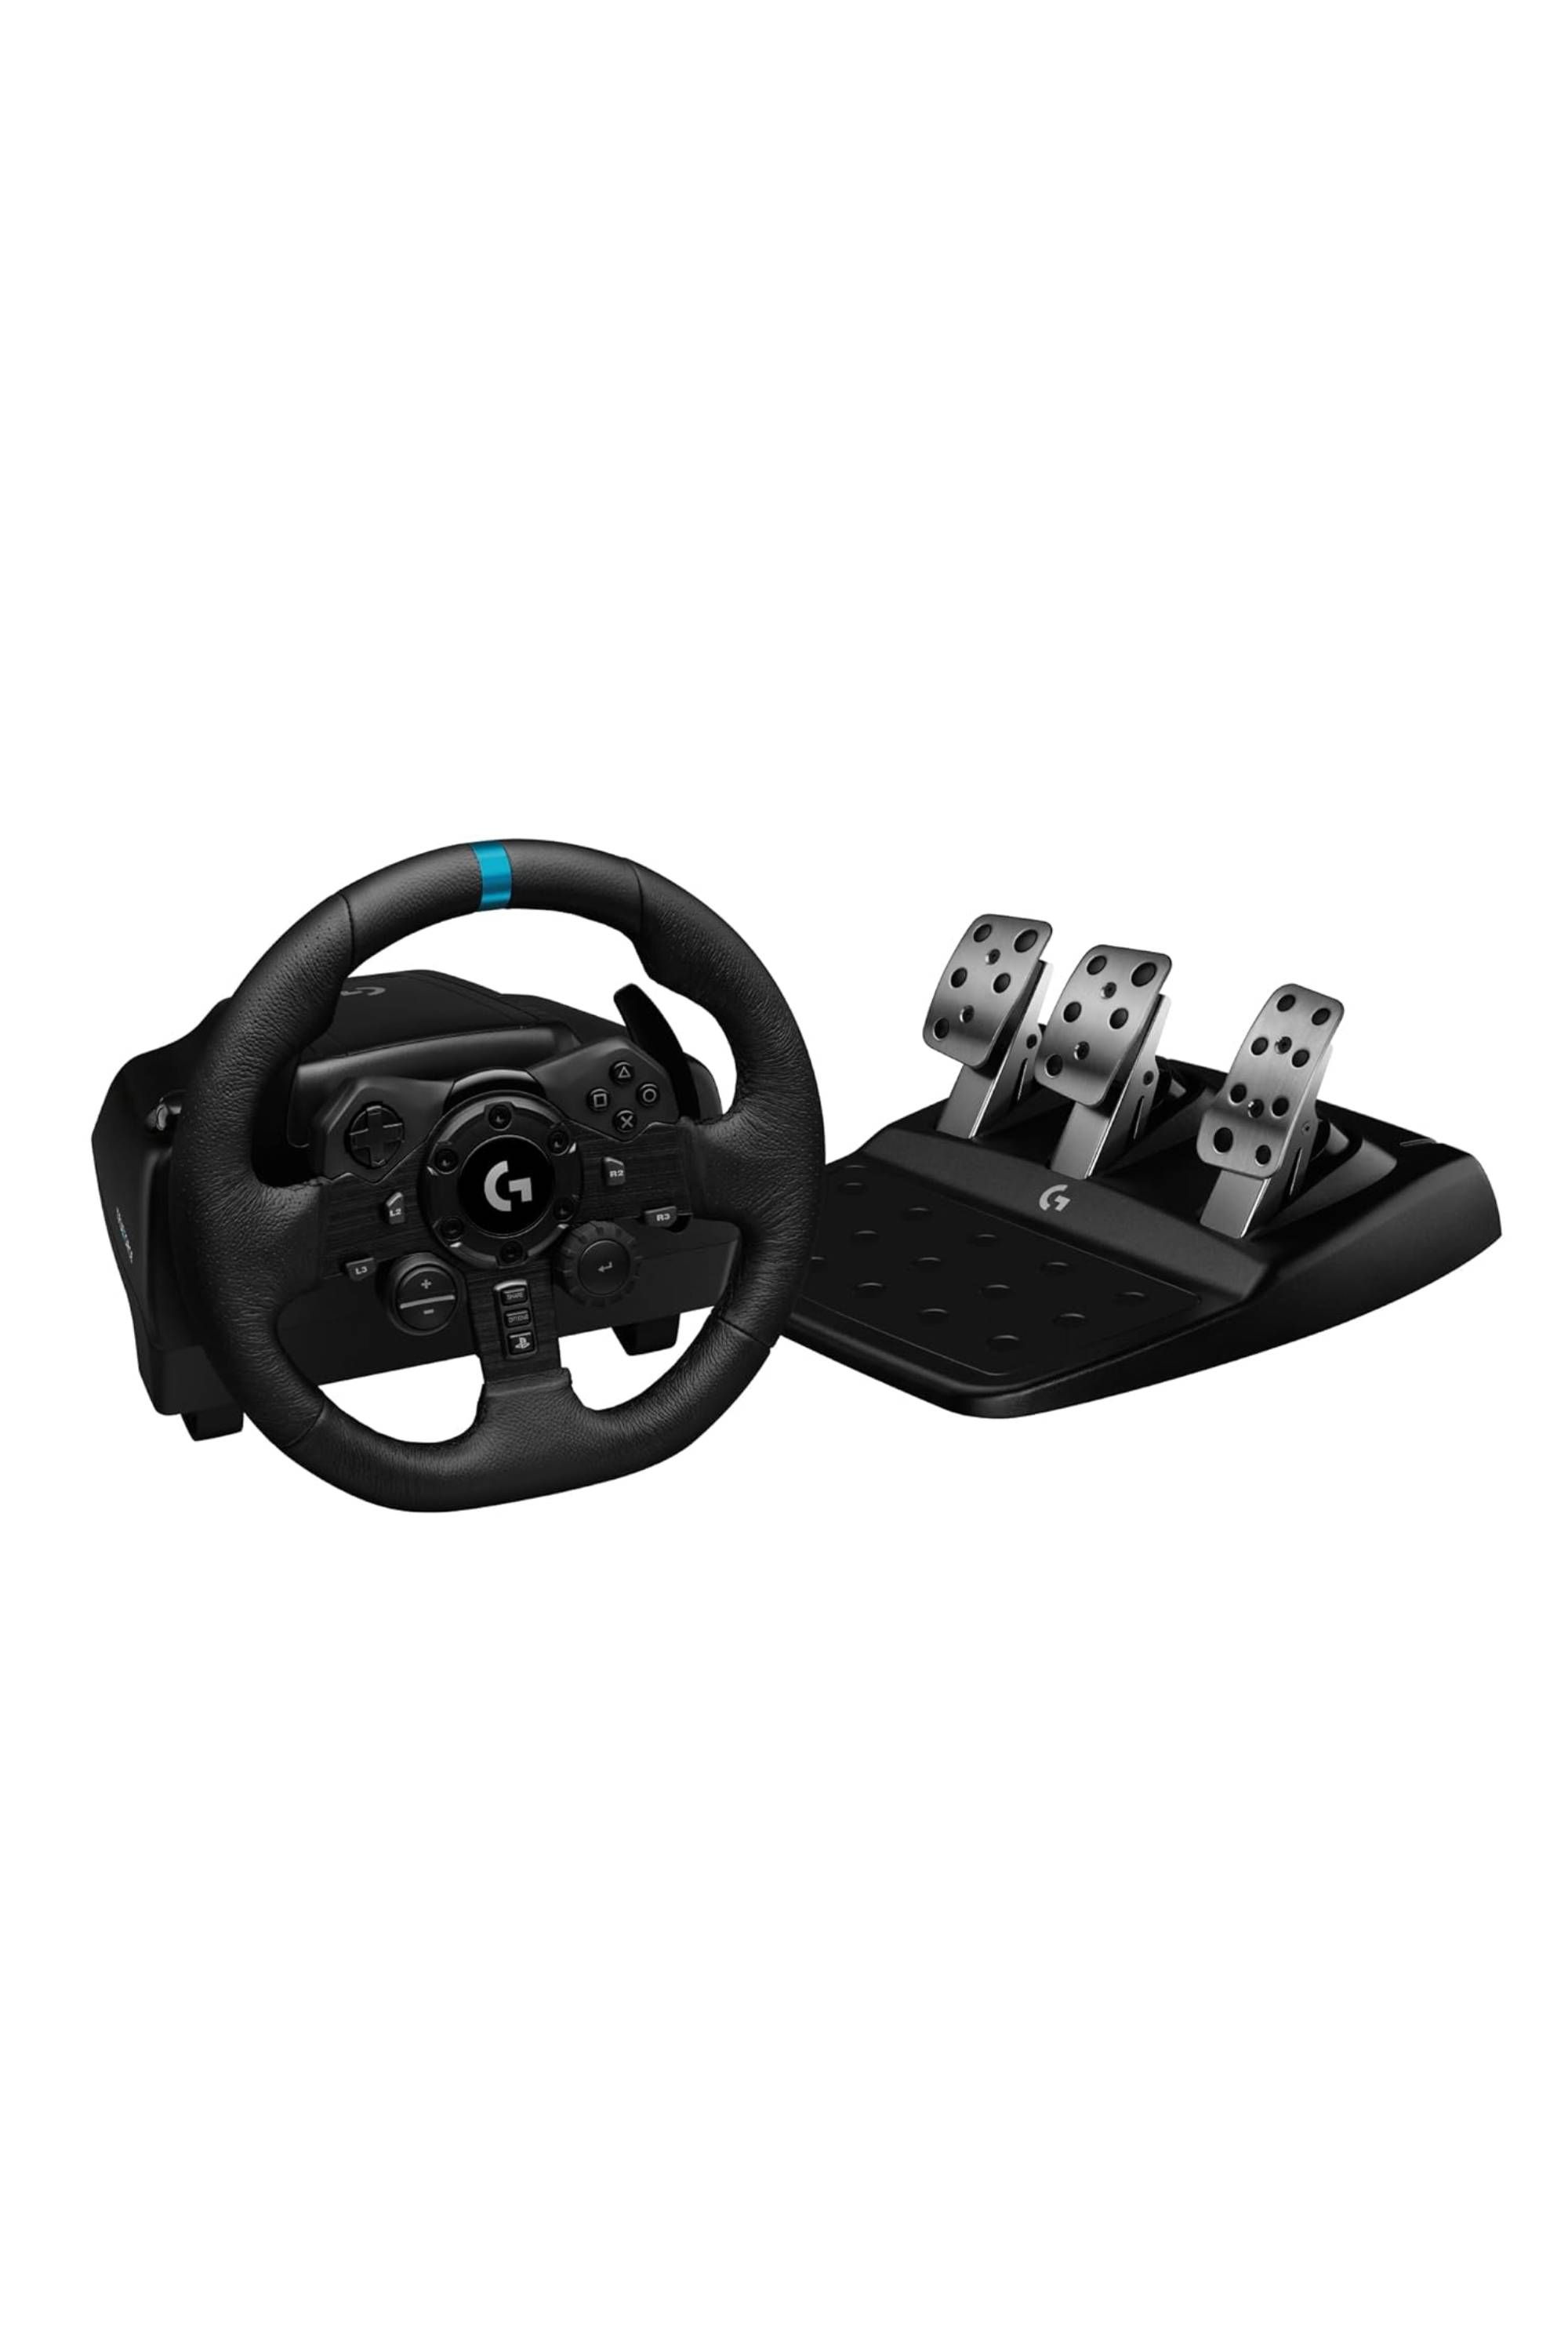 Logitech G923 Racing Wheel And Pedals